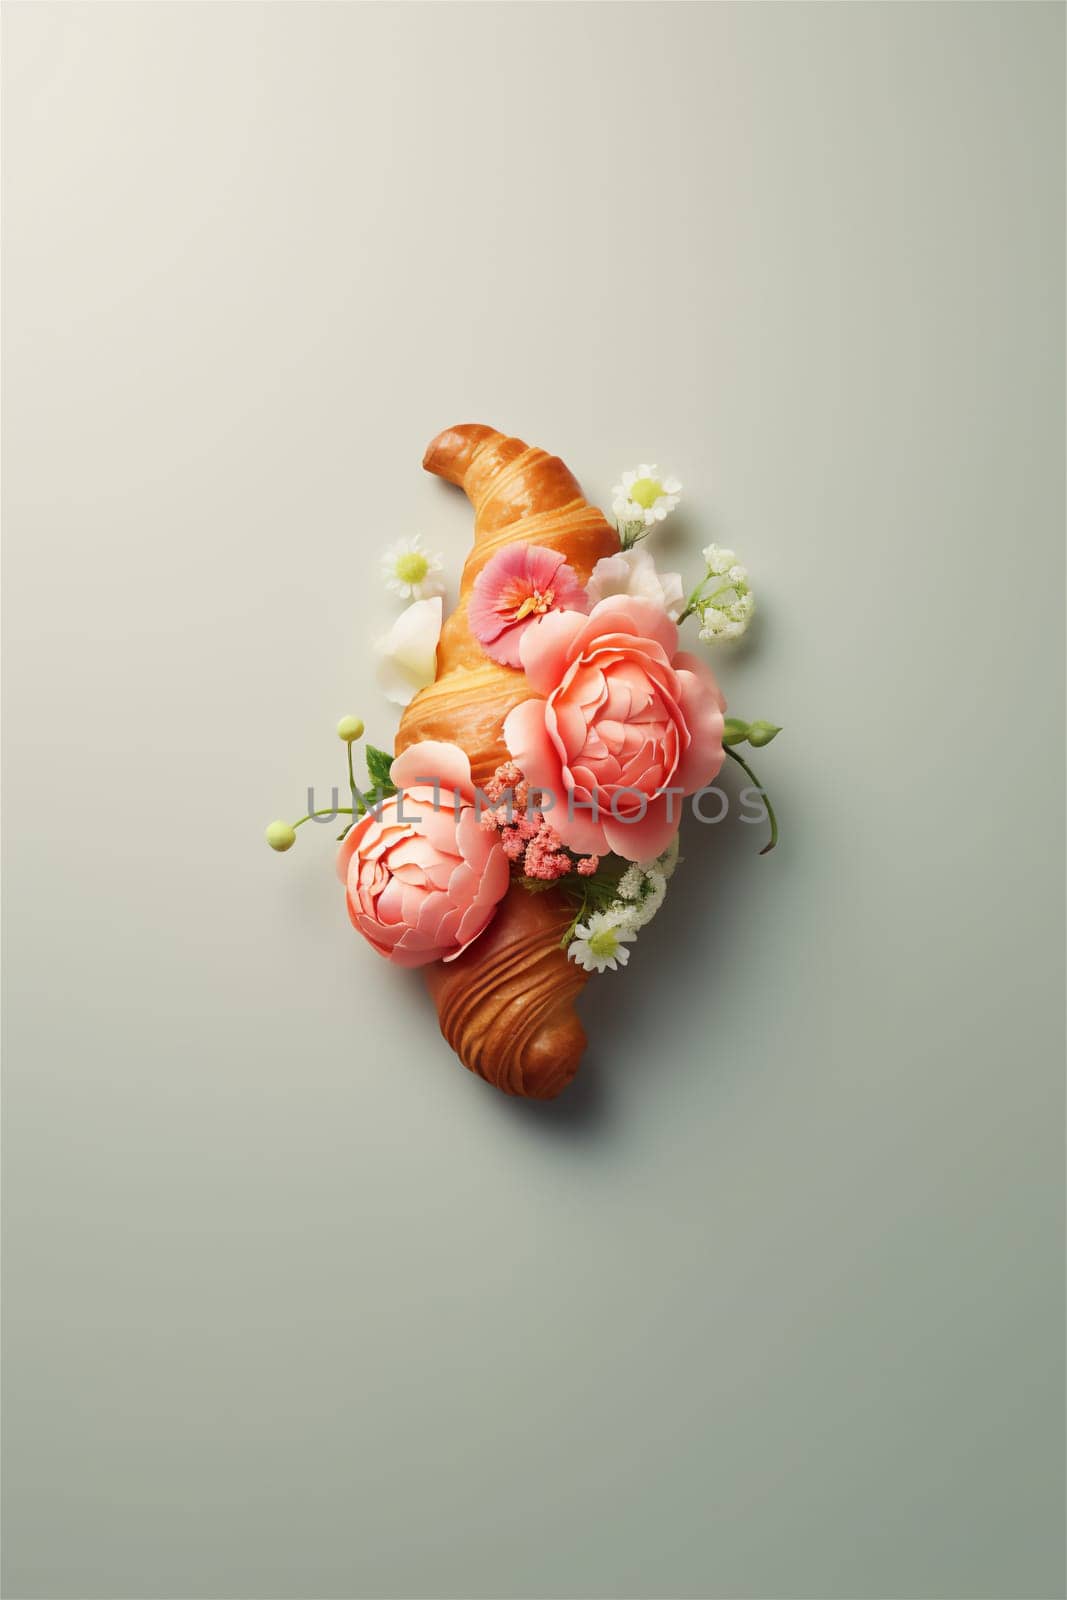 Tasty croissant with beautiful flowers on gray background by IrynaMelnyk